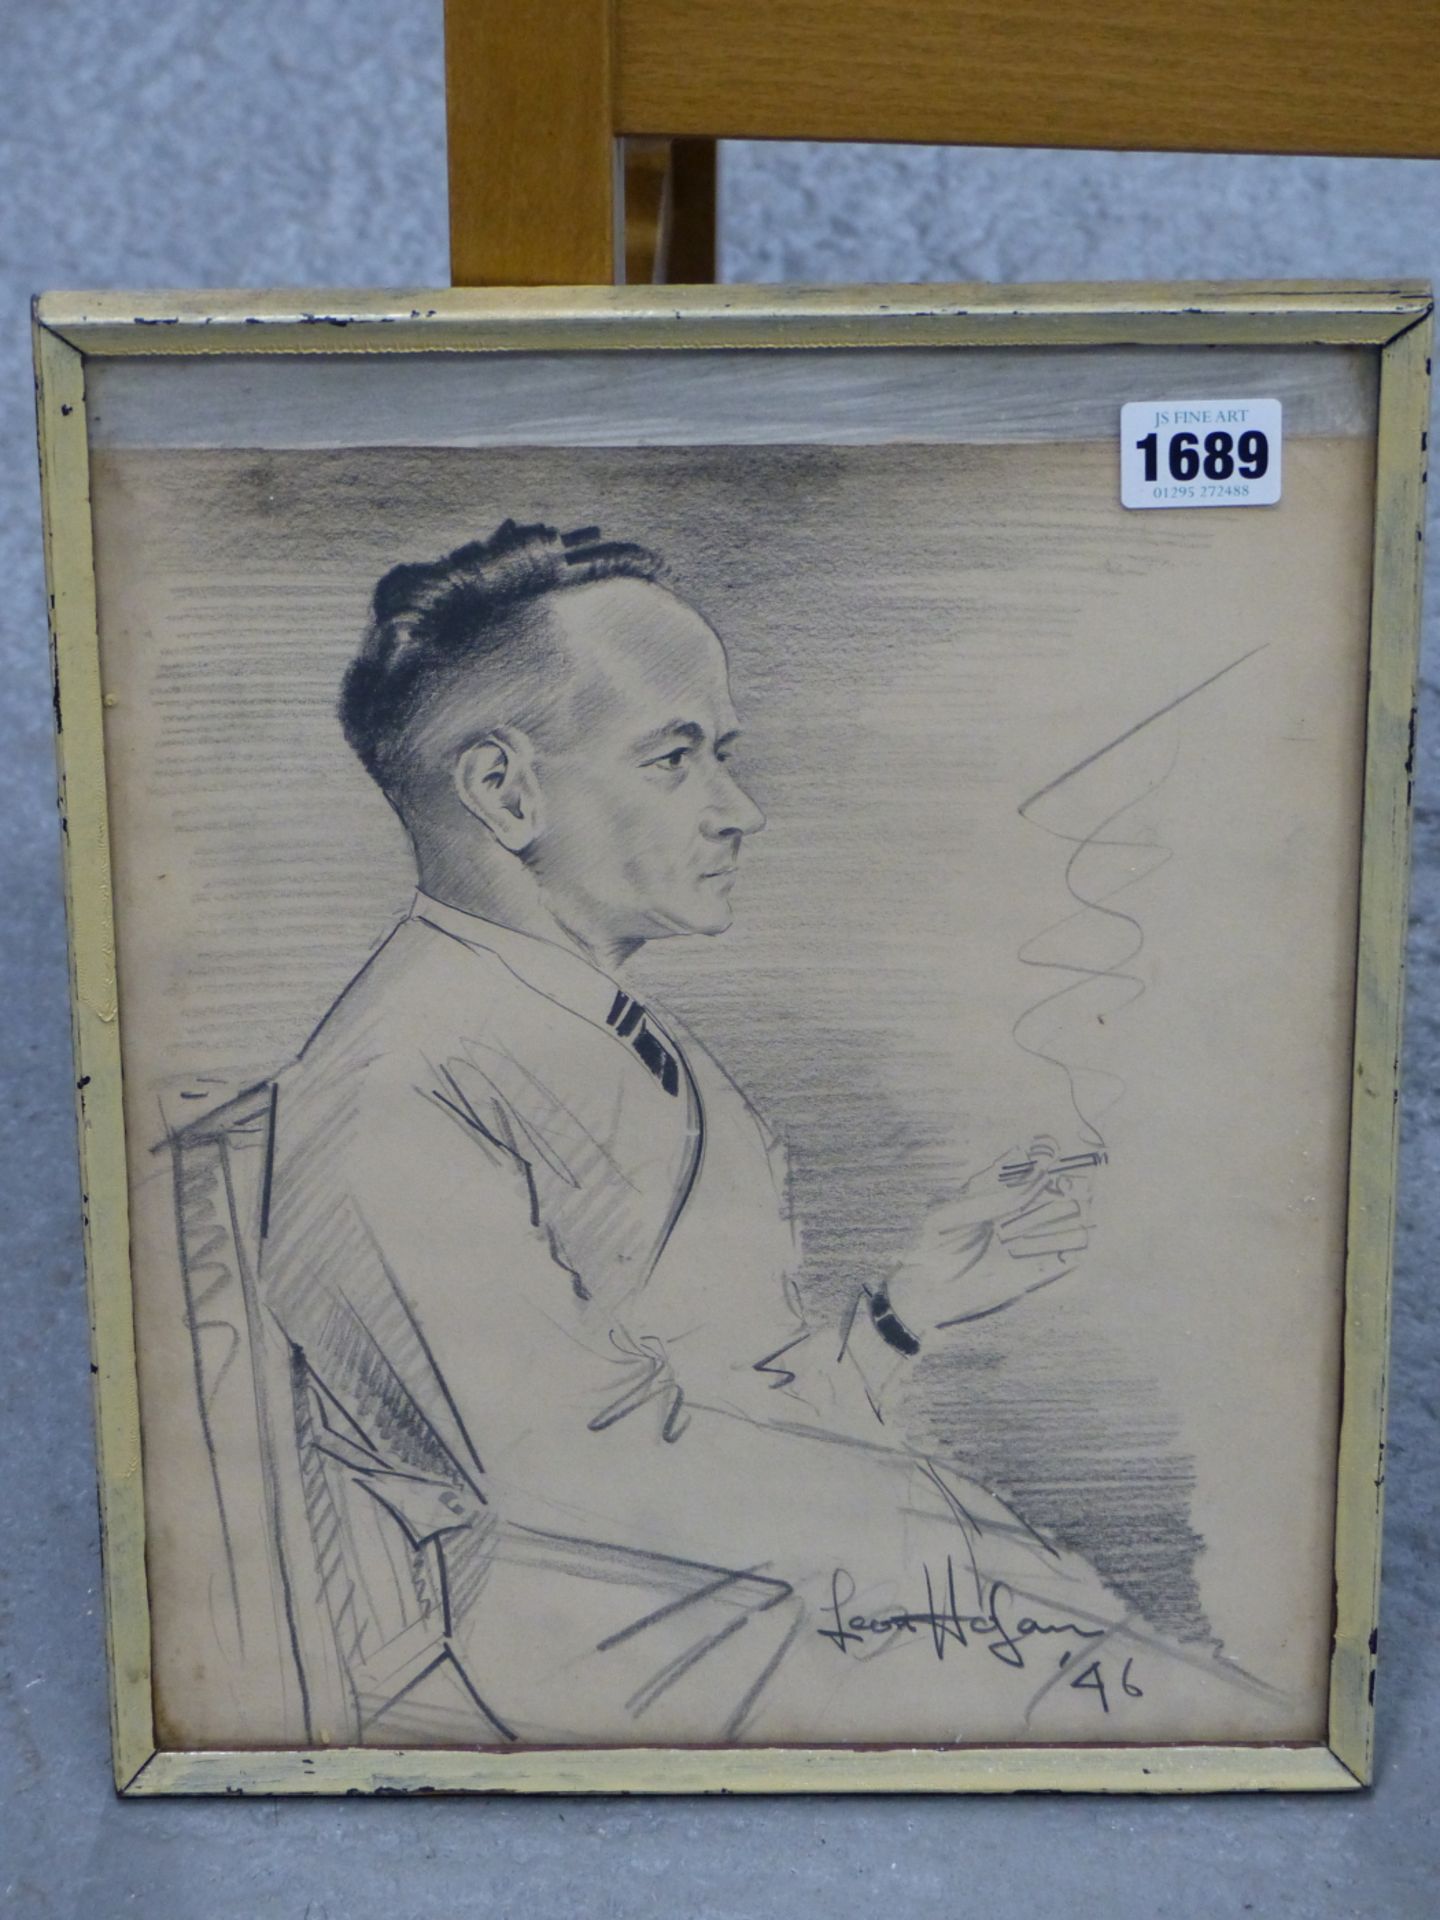 LEON HOGAN? MID 20TH CENTURY. STUDY OF A GENTLEMAN SMOKING. GRAPHITE PENCIL. SIGNED AND DATED '46. - Image 2 of 3